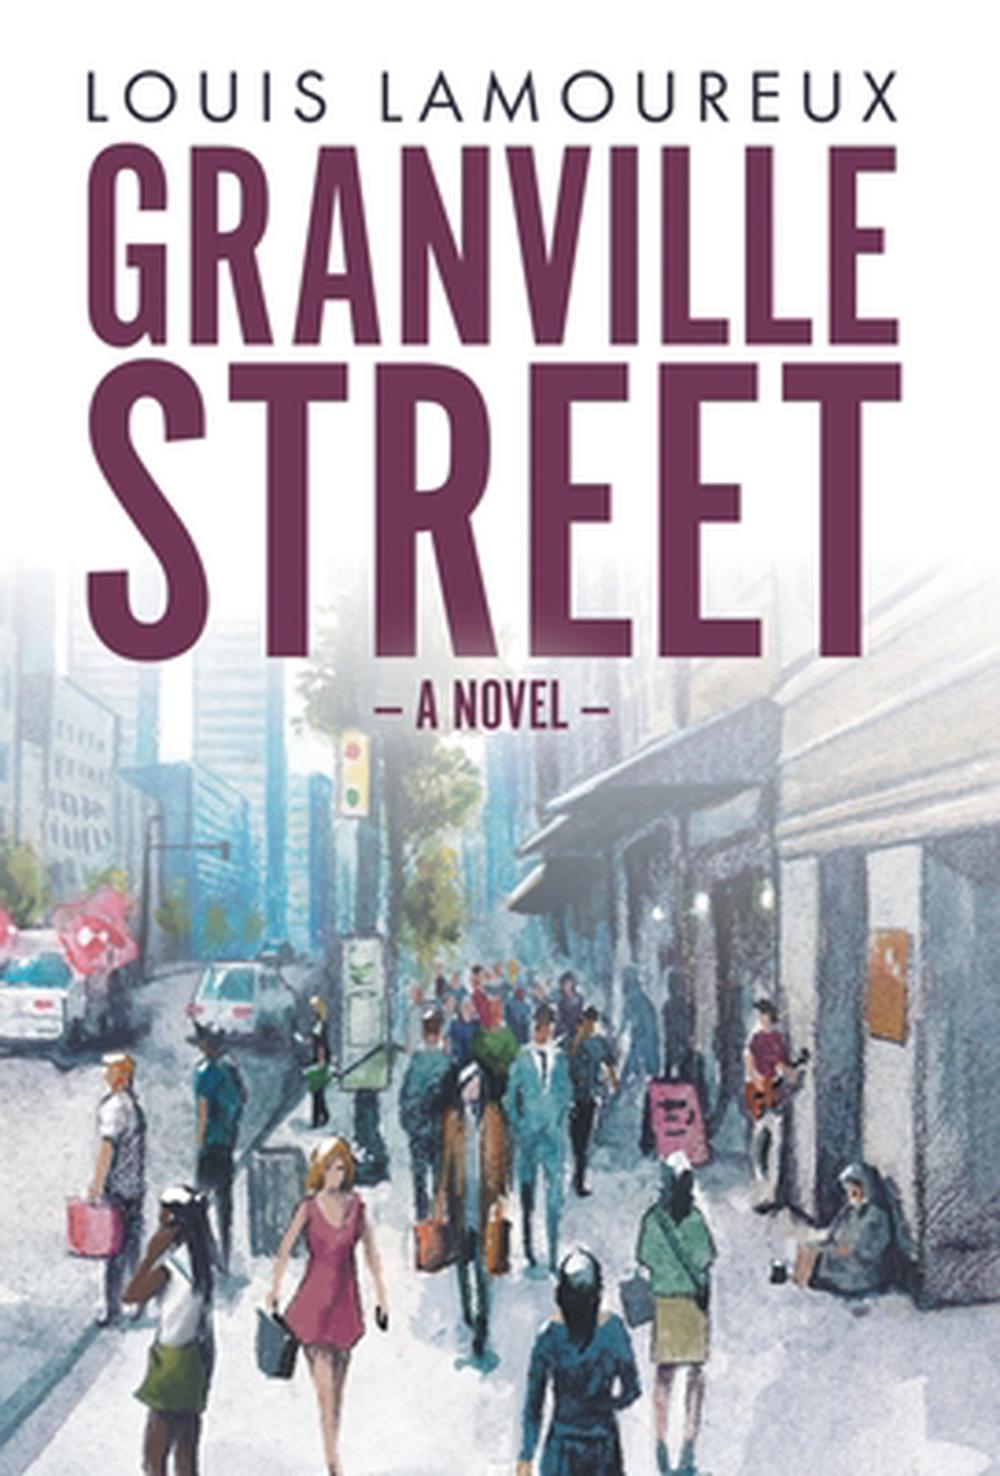 Granville Street (Hardcover) by Louis Lamoureux (English) Hardcover Book Free Sh 9780998407135 ...